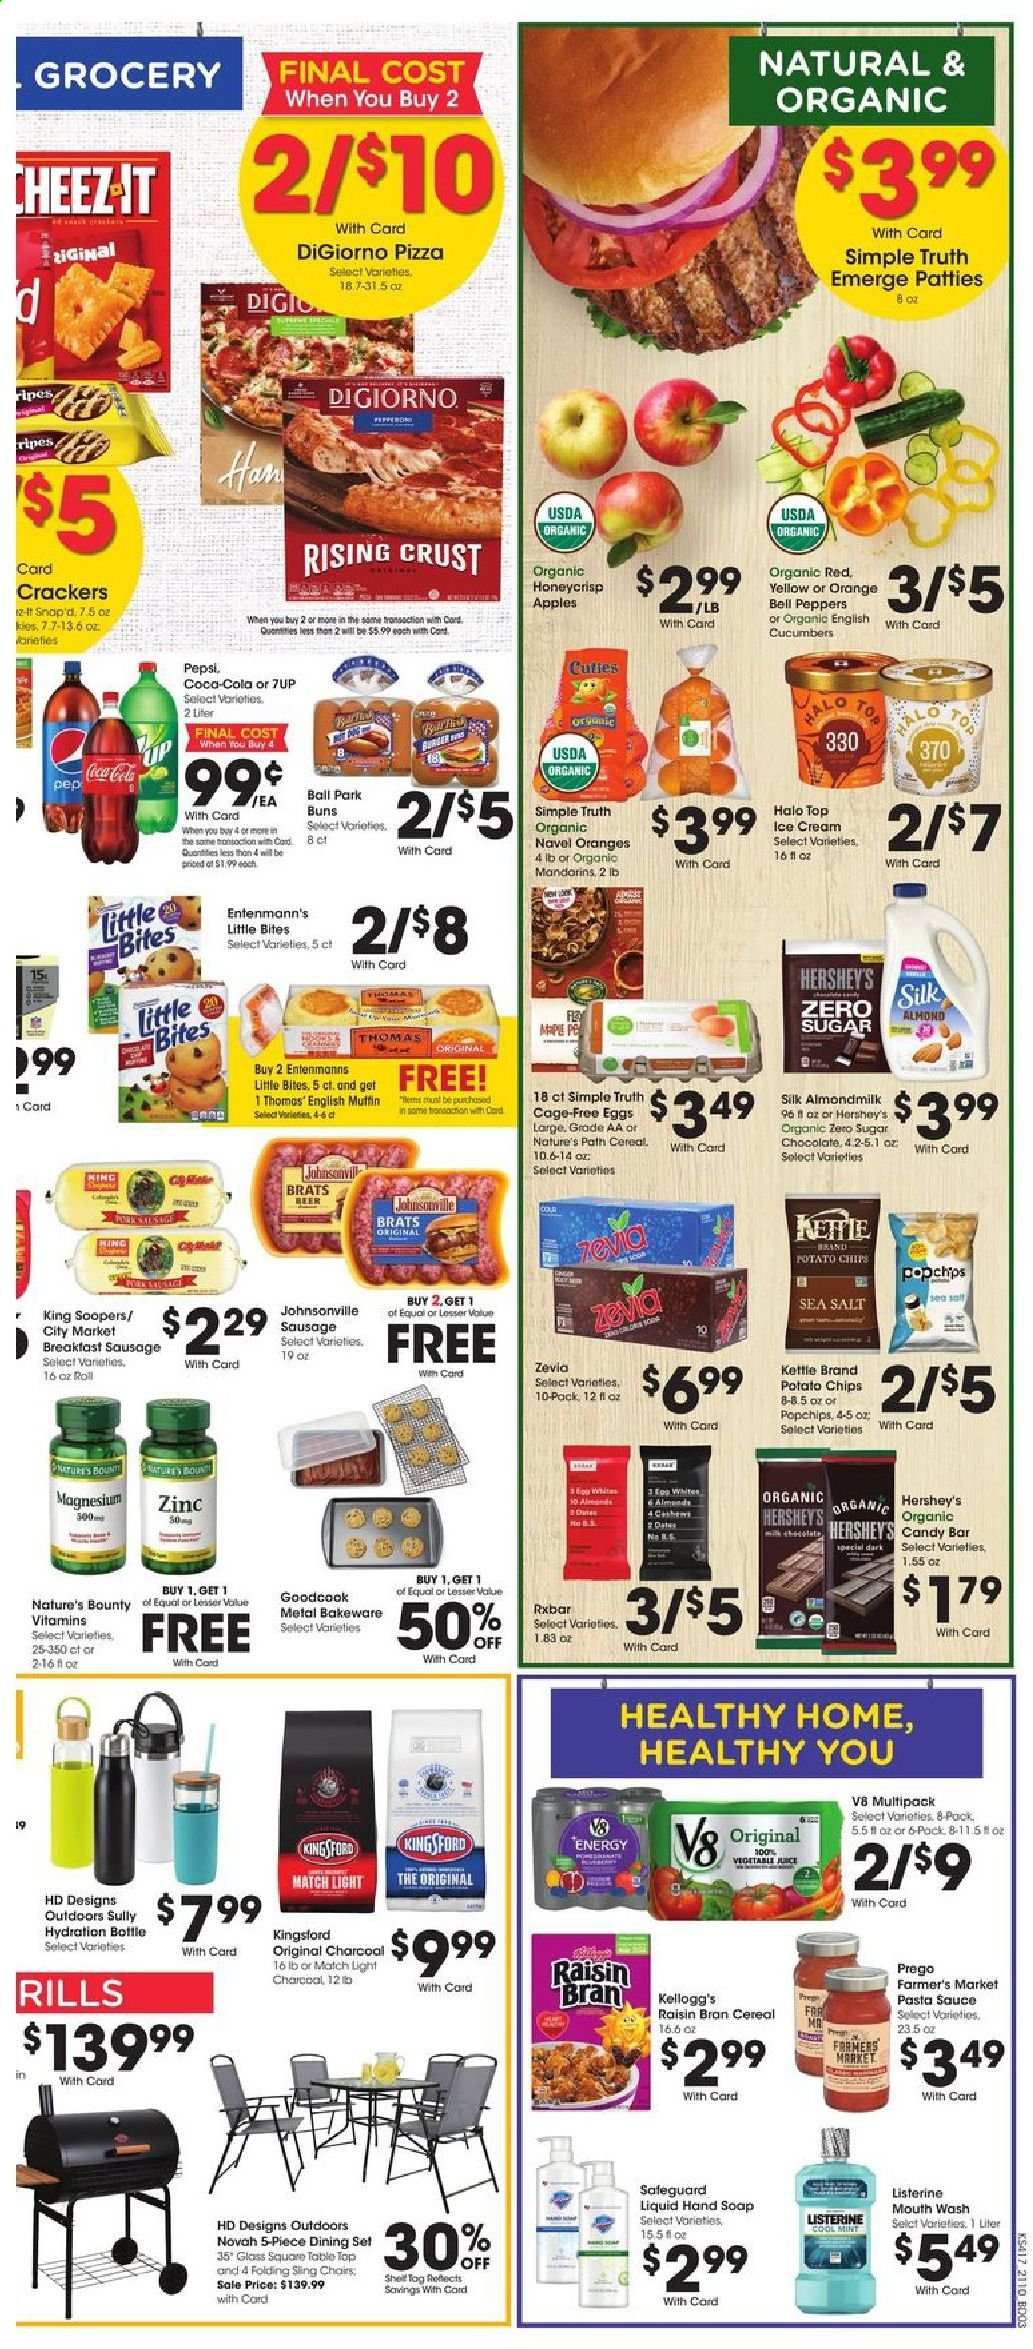 thumbnail - City Market Flyer - 04/07/2021 - 04/13/2021 - Sales products - buns, Entenmann's, bell peppers, cucumber, apples, mandarines, oranges, pizza, pasta sauce, hamburger, sauce, Johnsonville, sausage, almond milk, Silk, eggs, cage free eggs, ice cream, Hershey's, chocolate, Bounty, crackers, Kellogg's, Little Bites, potato chips, chips, sea salt, cereals, Raisin Bran, Coca-Cola, Pepsi, 7UP, beer, hand soap, soap, Listerine, bakeware, charcoal, magnesium, Nature's Bounty, zinc, peppers, navel oranges. Page 6.